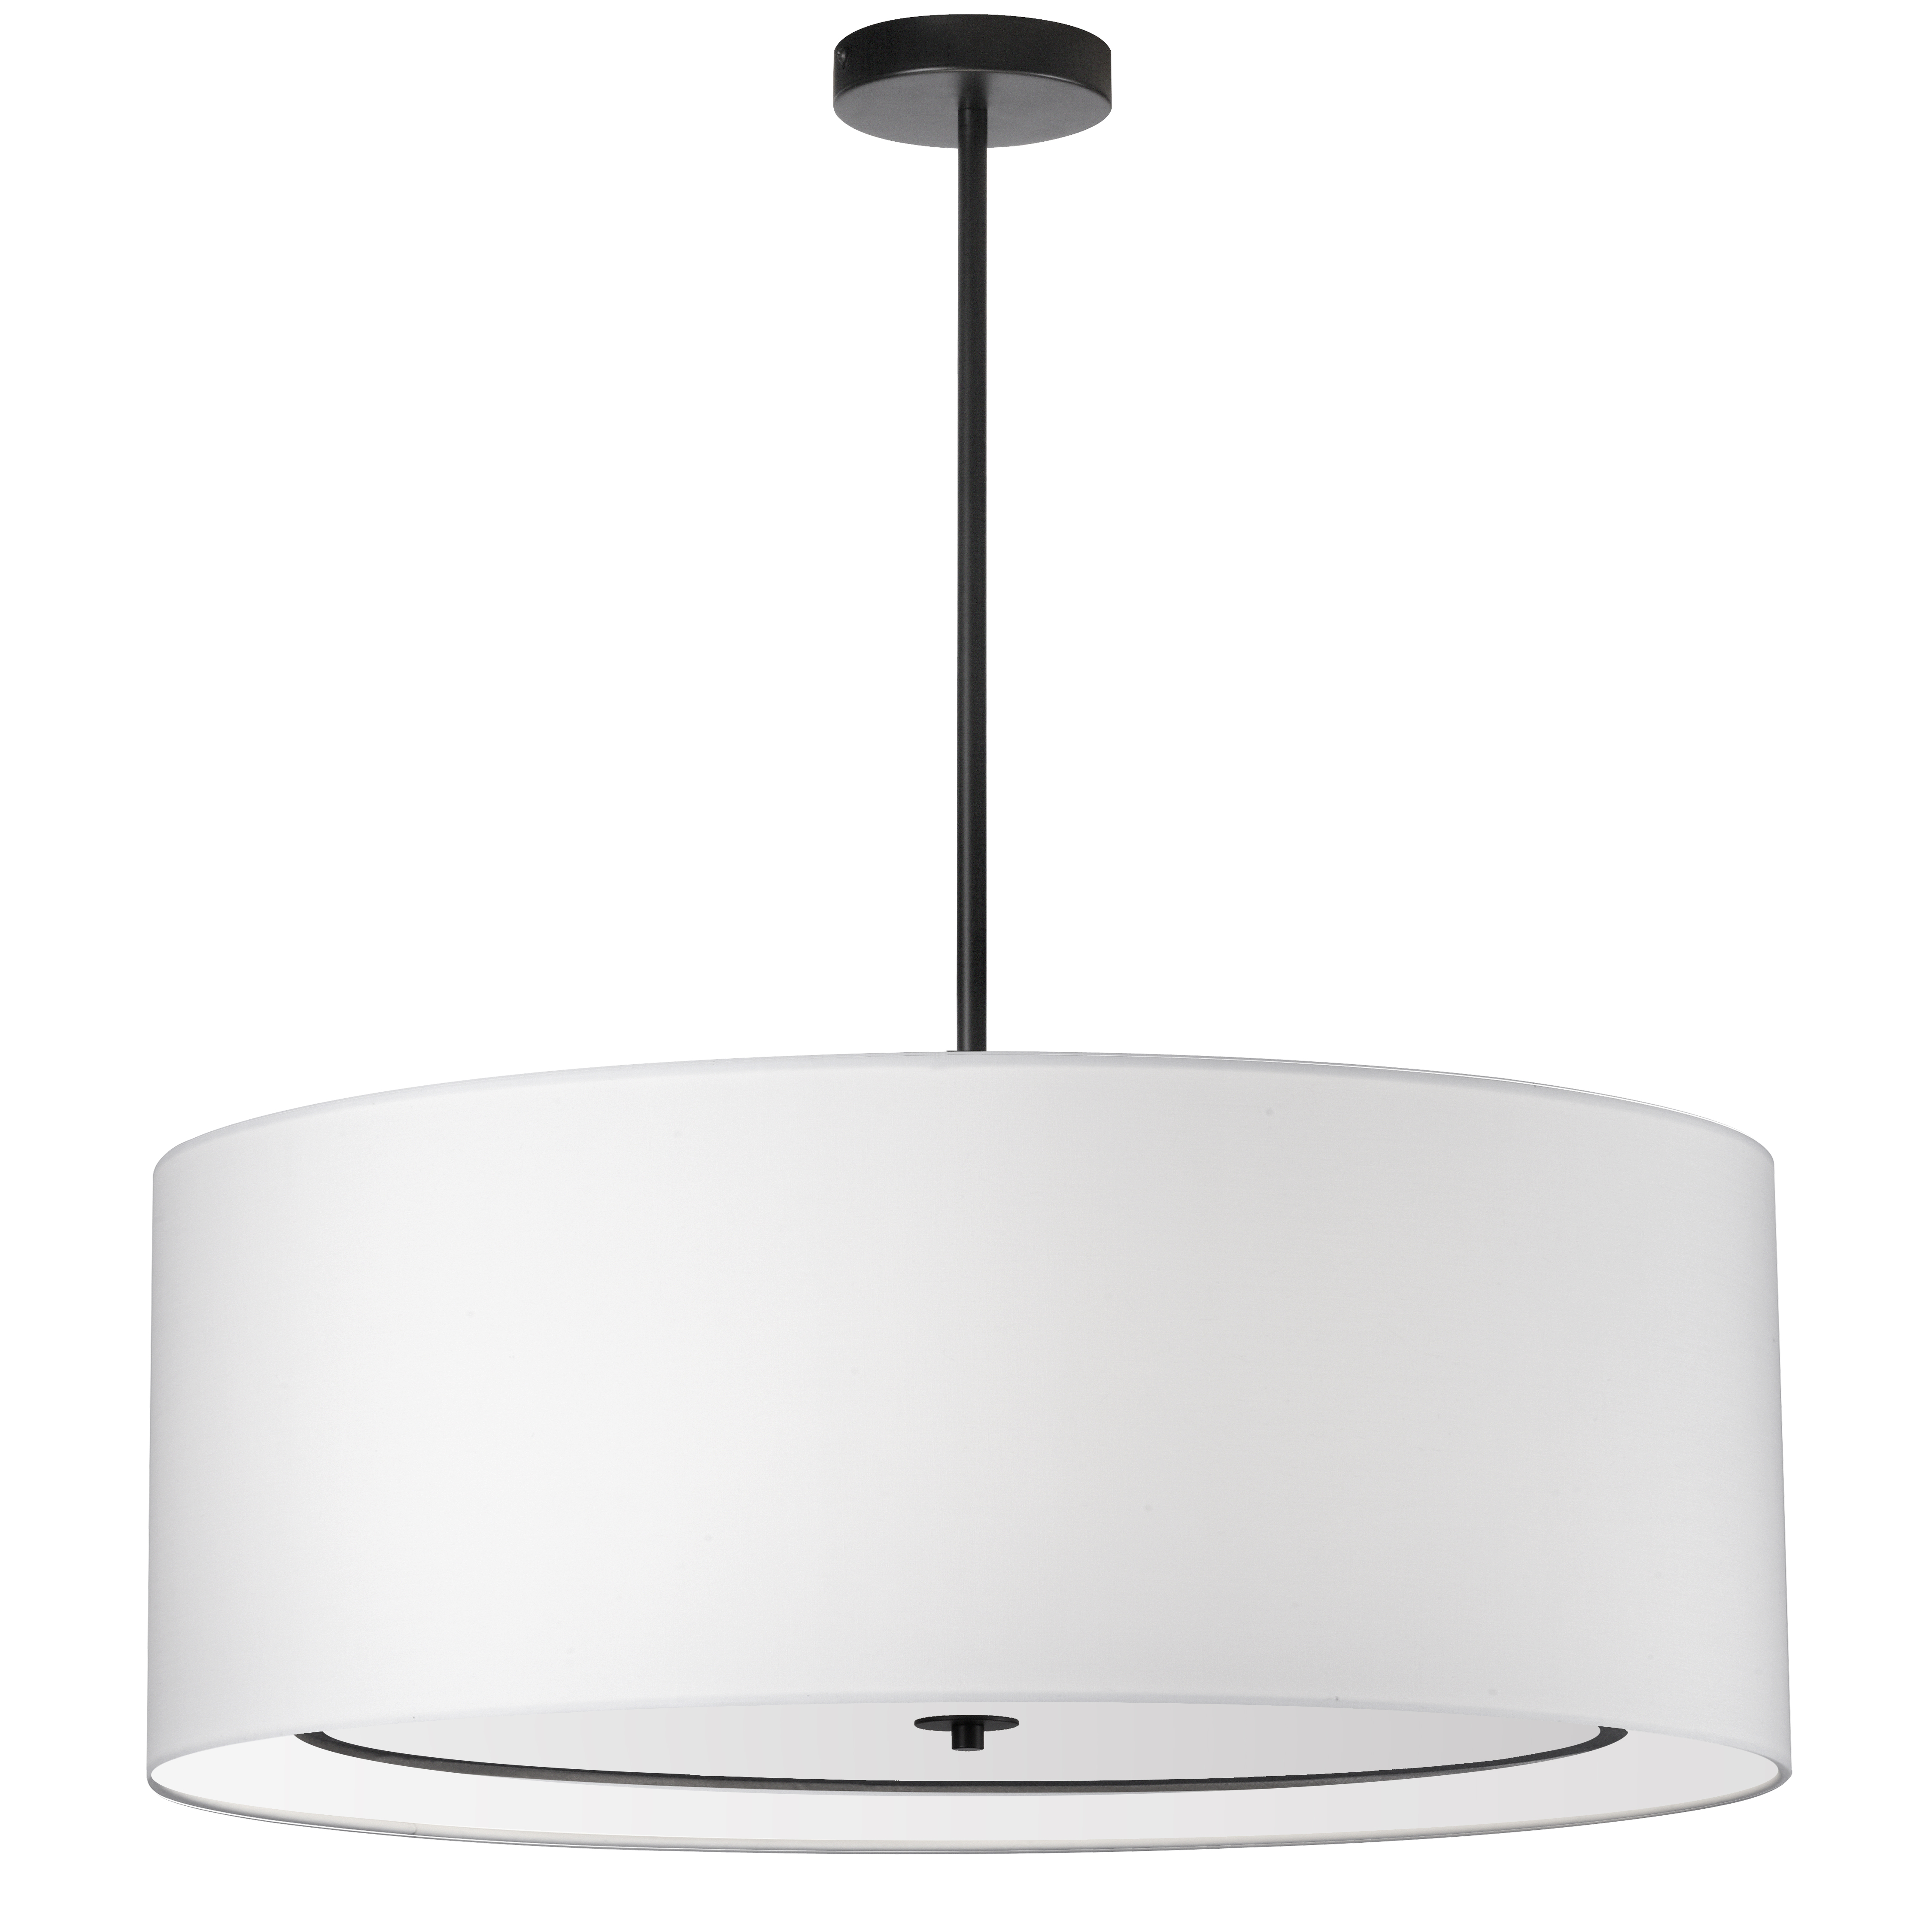 Elegant in its simplicity, the Porscha family of lighting adds a note of chic contrast to contemporary or minimalist furnishings. Its pleasing curves make a definitive statement in refined style. The metal frame comes in matte black finish, contrasted by a white fabric shade. It's a classic color combination echoed in the white and black diffuser along the inside of the design. It's a clean and traditional drum shade design with a polished contemporary makeover, perfect for living rooms, kitchens or foyers.  